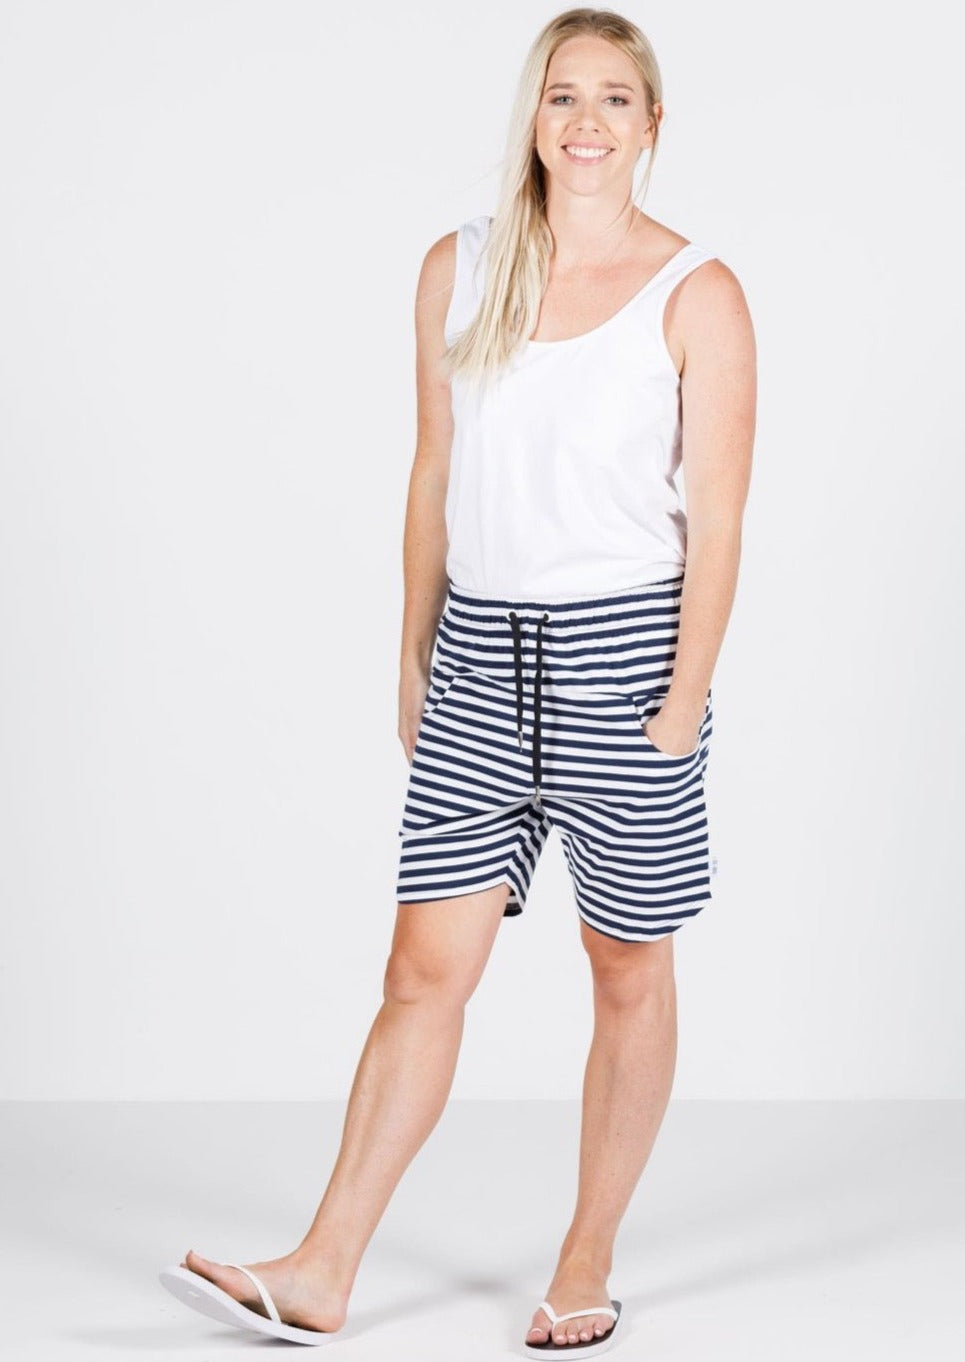 Apartment Shorts - Navy/White Stripe  The newest member of the Apartment Pant family by kiwi brand Home-Lee, and the most comfortable shorts you'll wear this summer!  Details: Elasticated waist with white drawstring.   Cotton/elastane fabric for the ultimate feel and stretch.  Designed to sit just above the knee and have a slight curve on the hem  Fresh/nautical Navy & White Stripe.